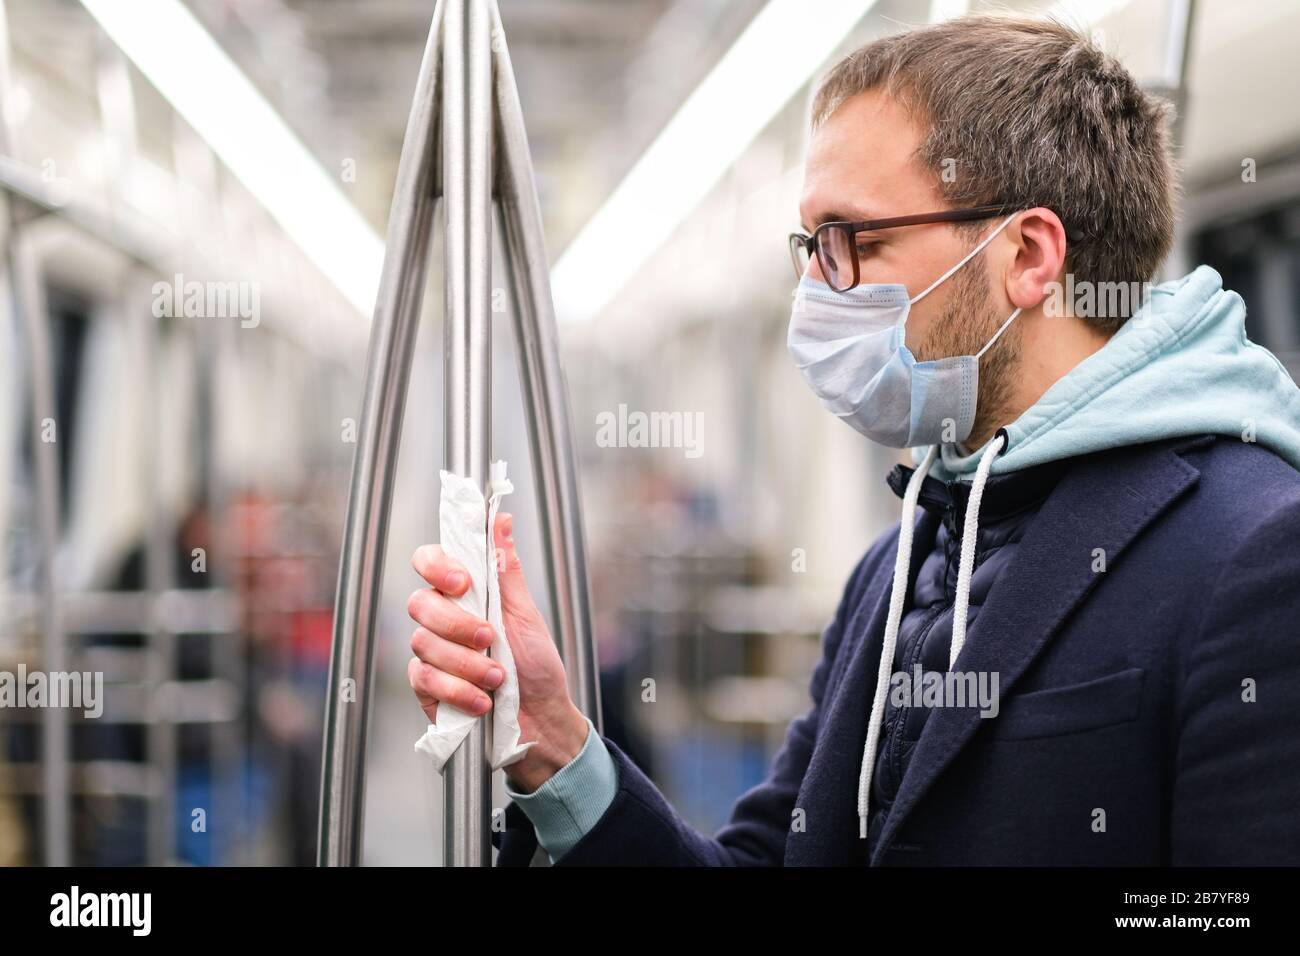 Close up of man holds a handrail in public transport/subway through a napkin, to protect yourself from contact with viruses, germs during a coronaviru Stock Photo